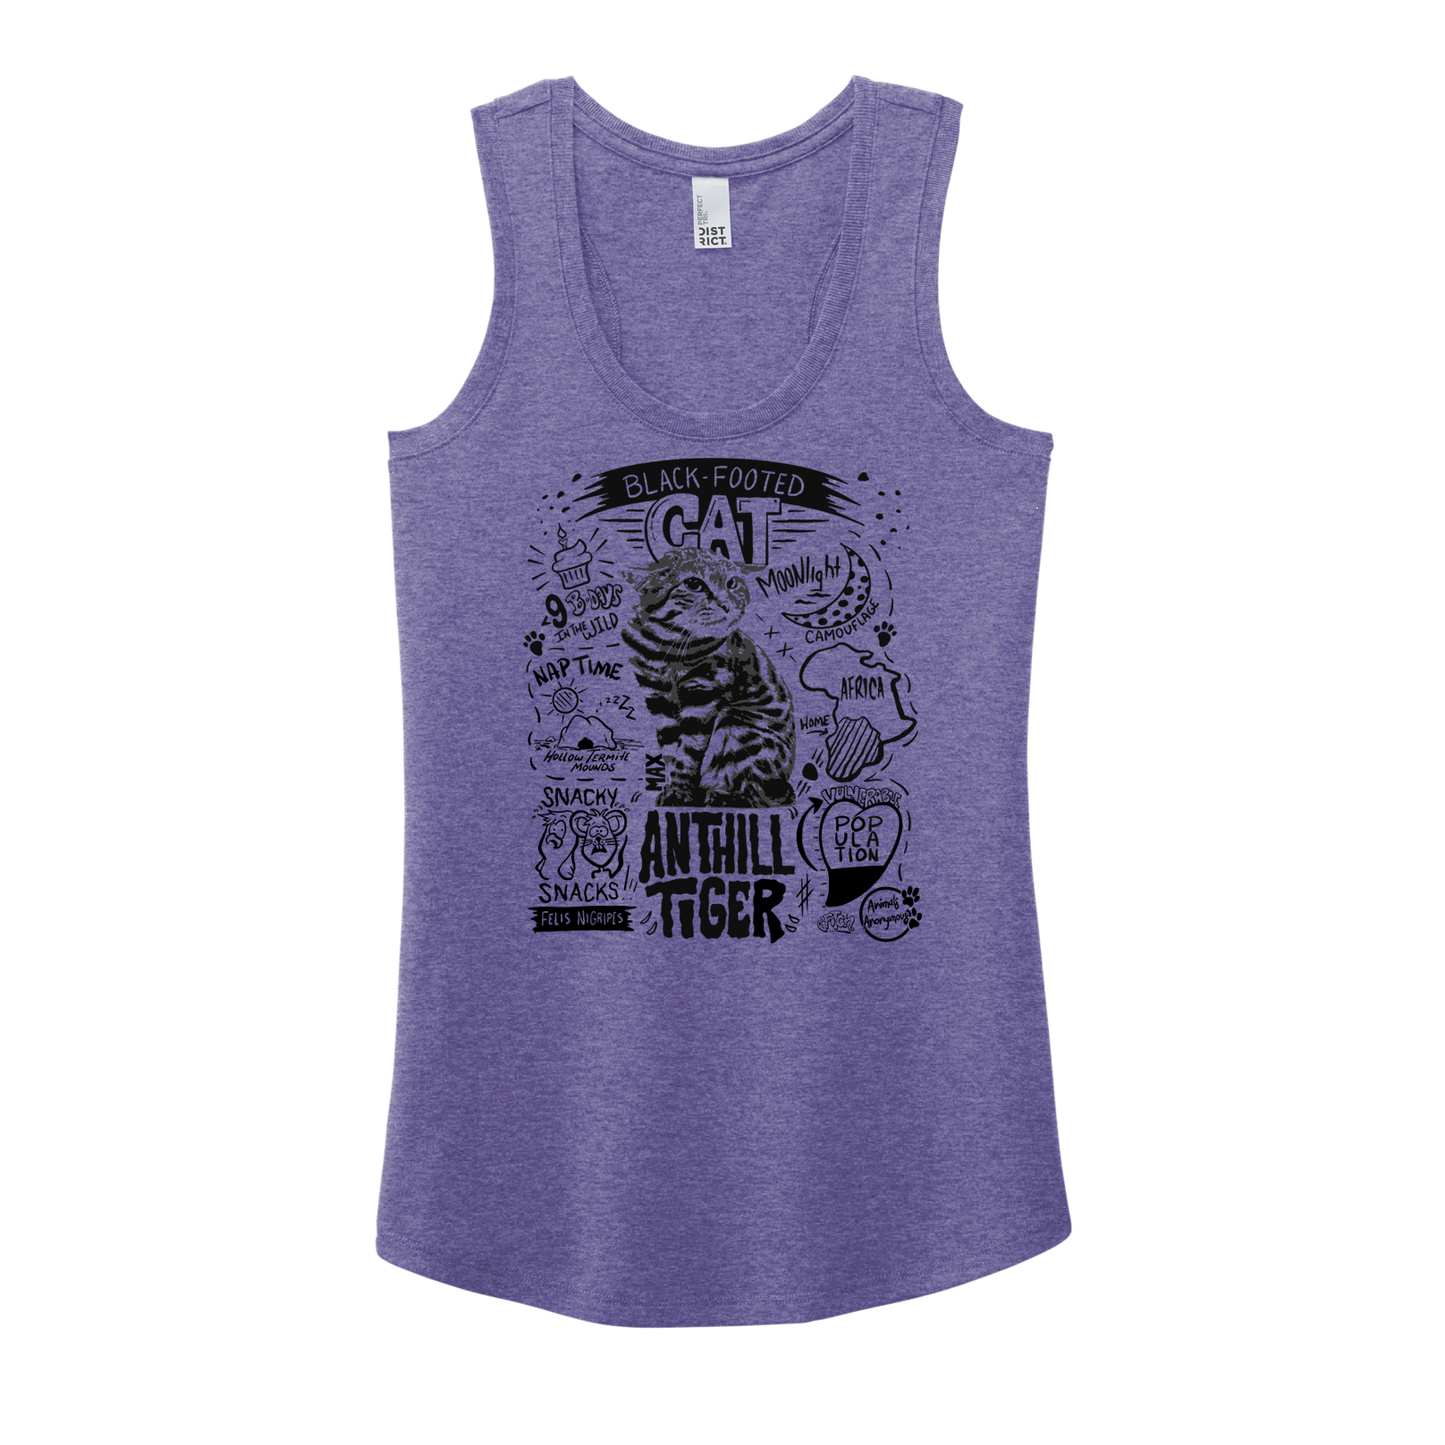 Black Footed Cat Fundraiser - Women's Tank (Pre order)